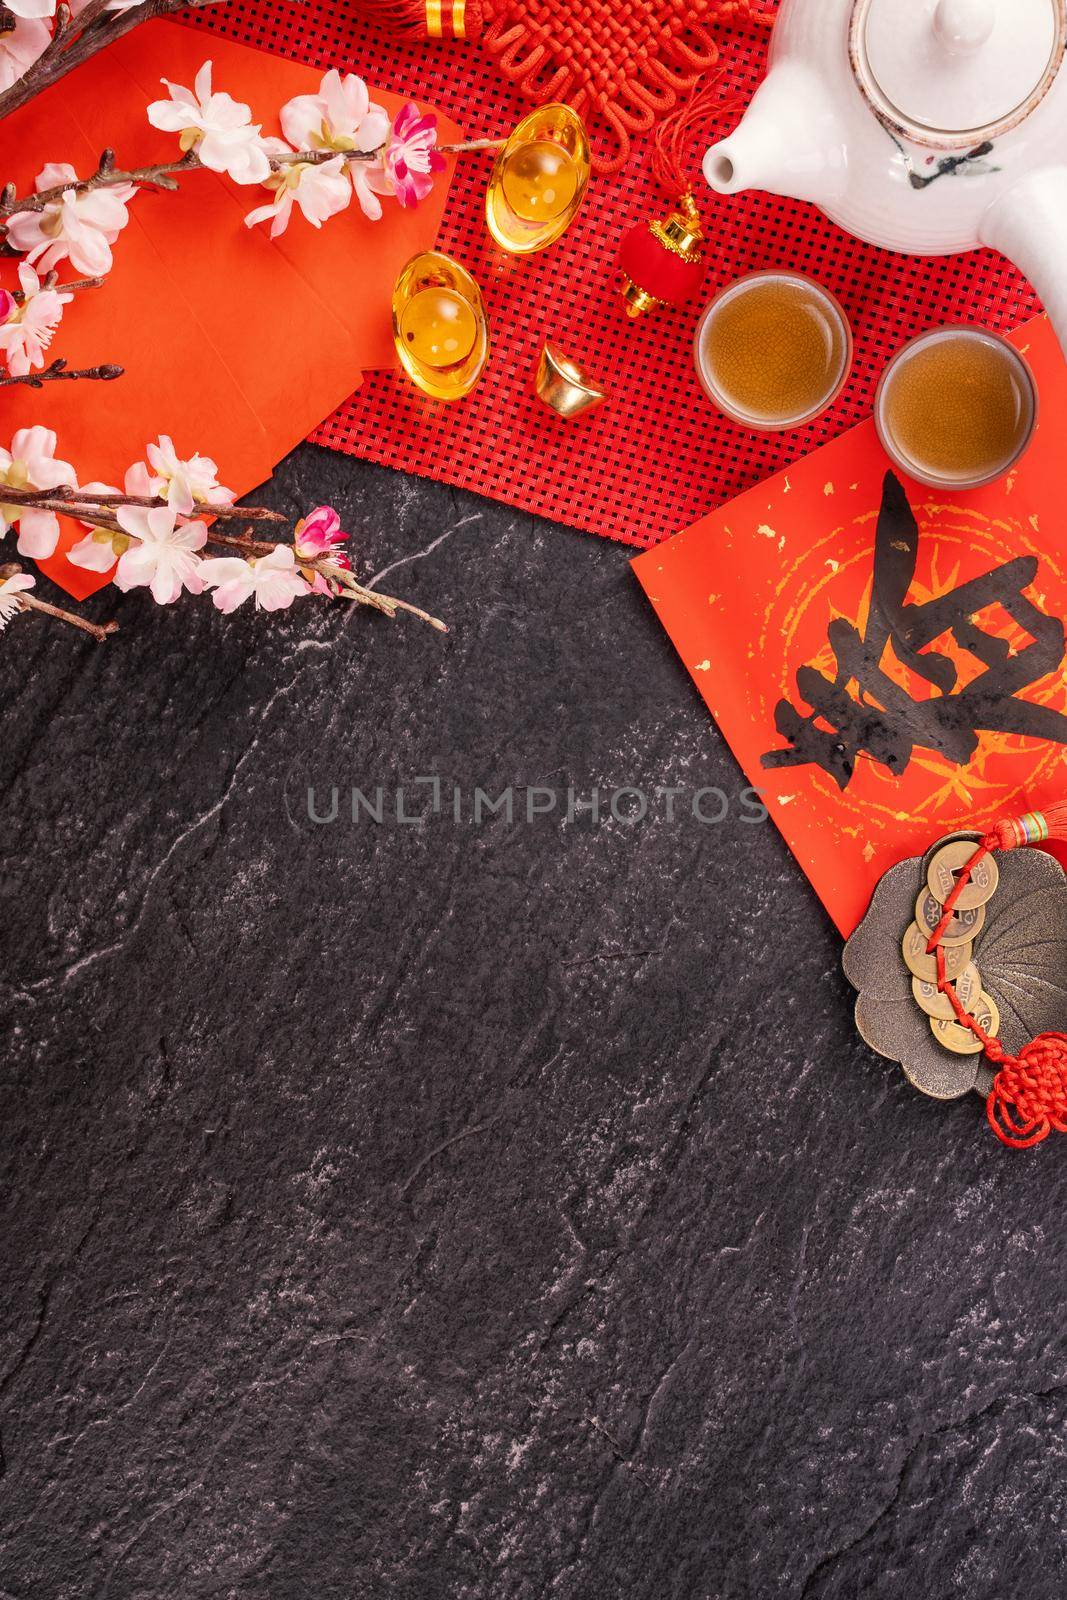 Design concept of Chinese lunar January new year - Festive accessories, red envelopes (ang pow, hong bao), top view, flat lay, overhead above. The word 'chun' means coming spring. by ROMIXIMAGE